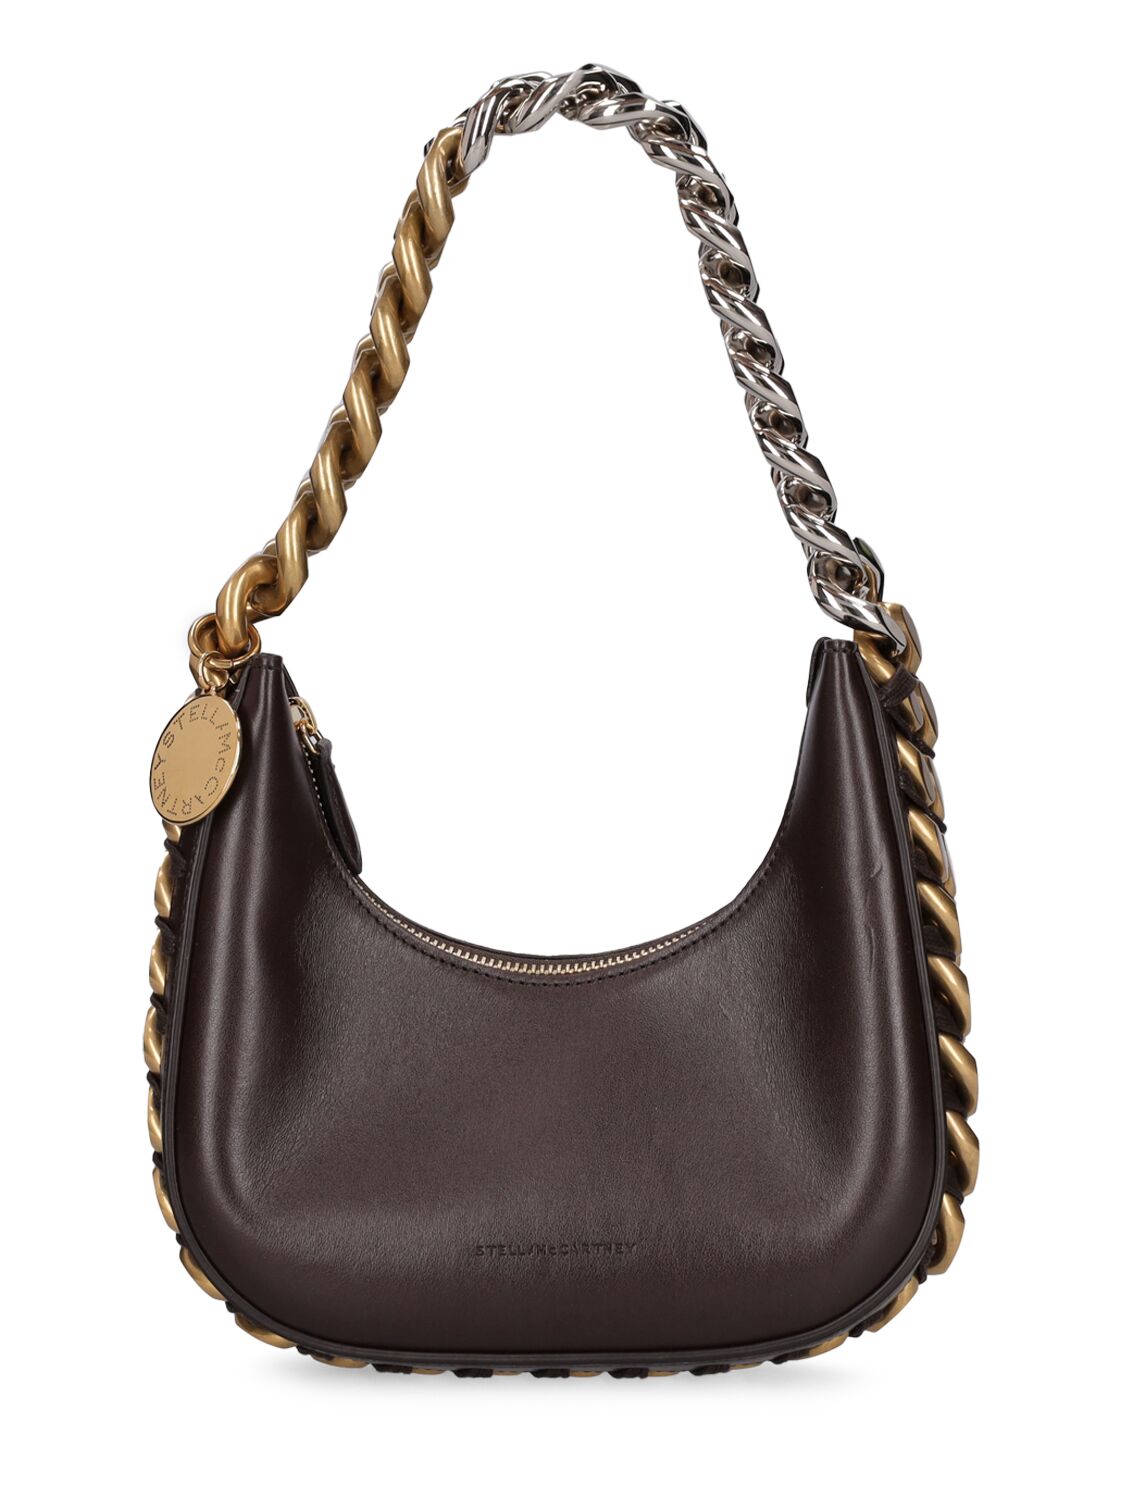 Stella Mccartney Alter Mat Faux Leather Shoulder Bag In Choco Brown